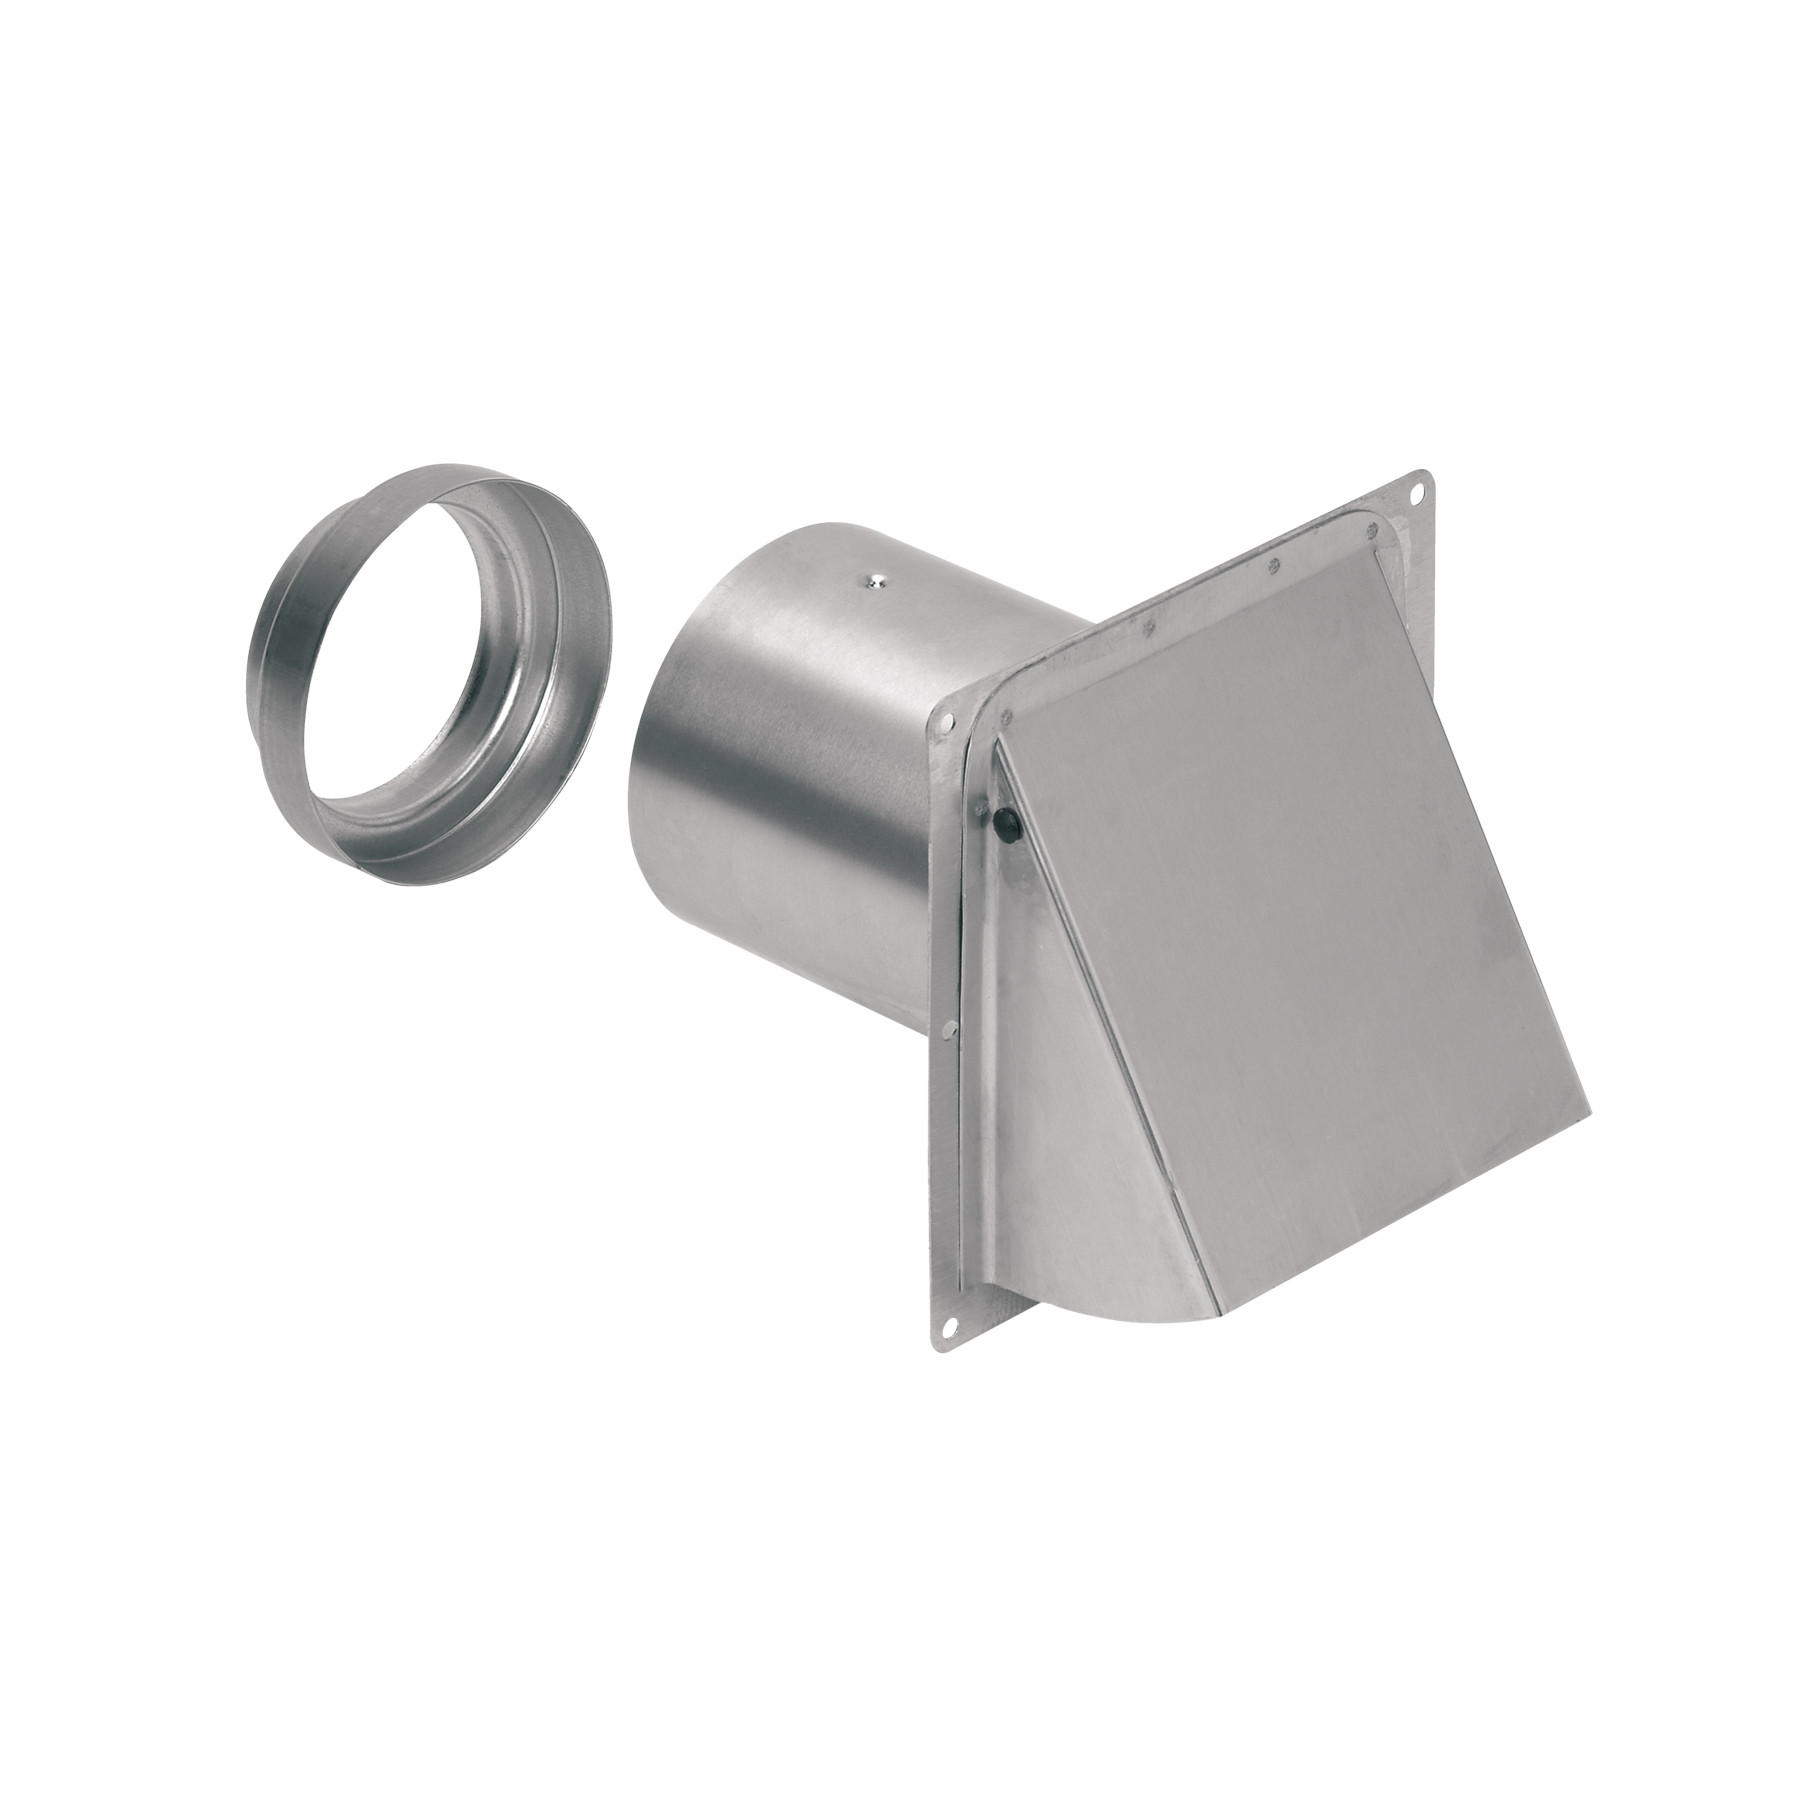 DISCONTINUED: Wall Cap, Aluminum, for 3-Inch and 4-Inch round duct